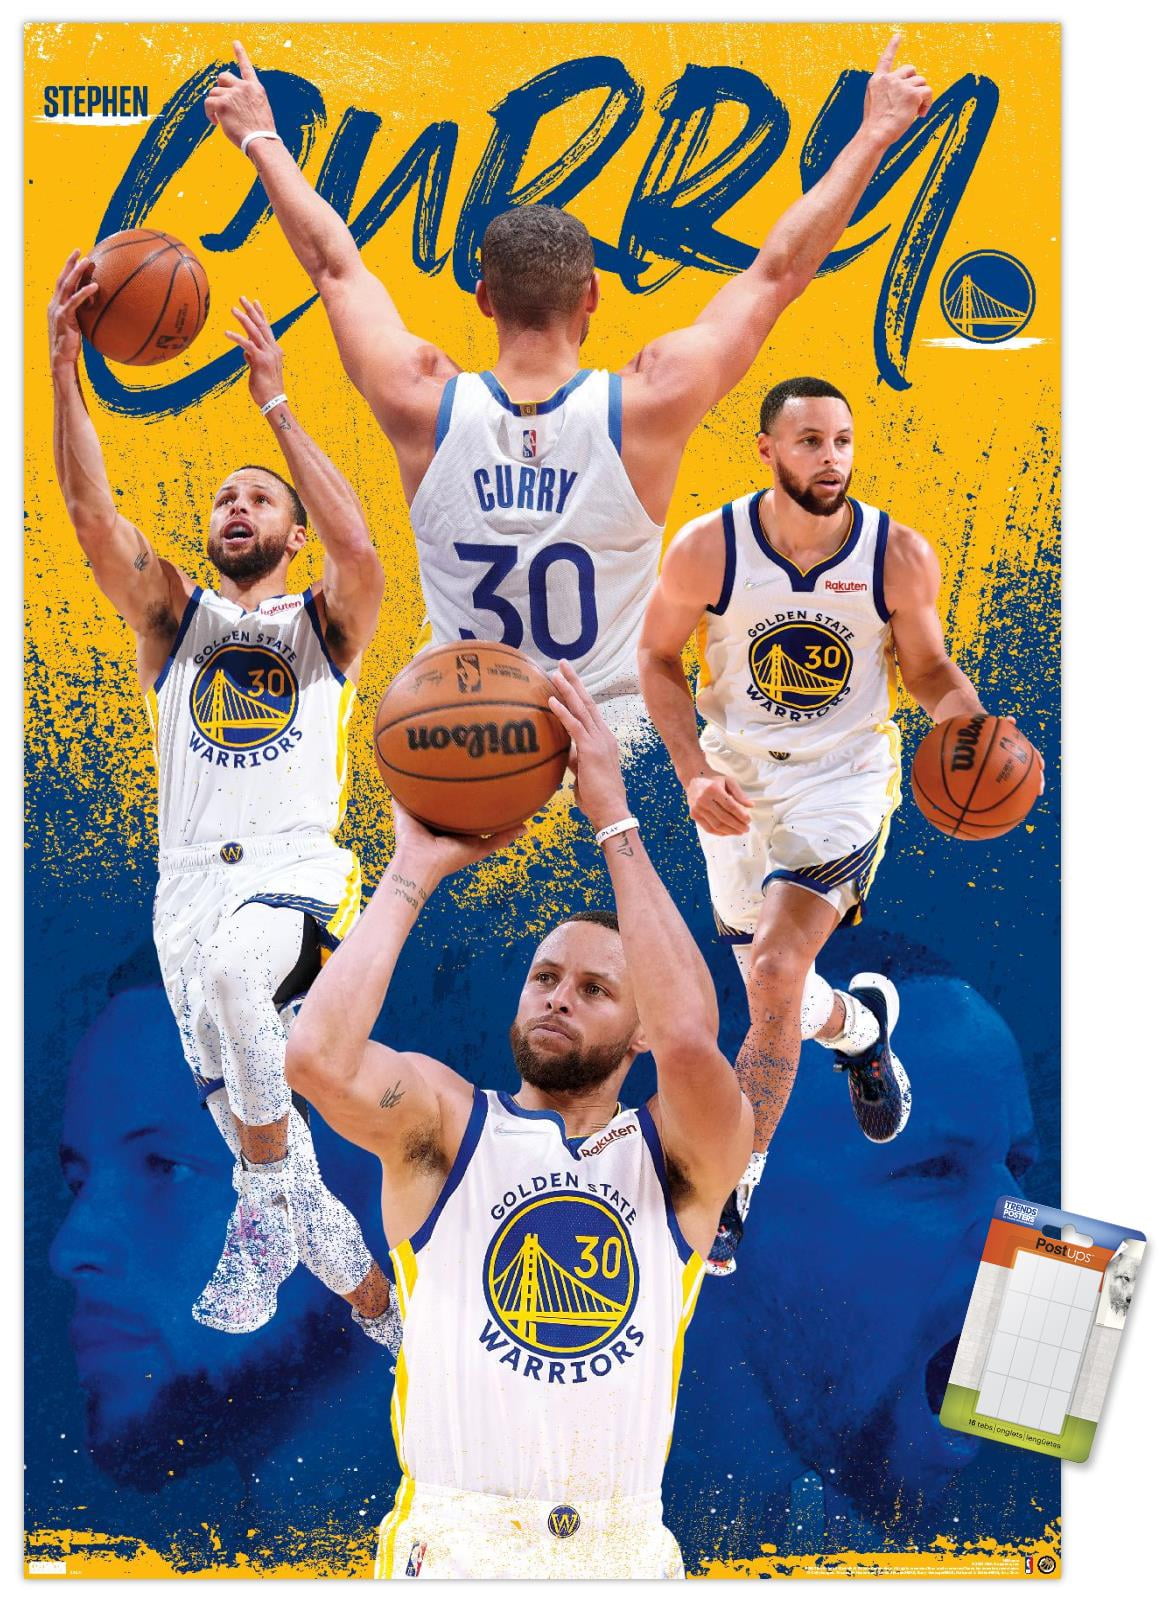 Pin by Golden State Warriors on Warriors Artwork  Golden state warriors  wallpaper, Golden state warriors, Warriors wallpaper